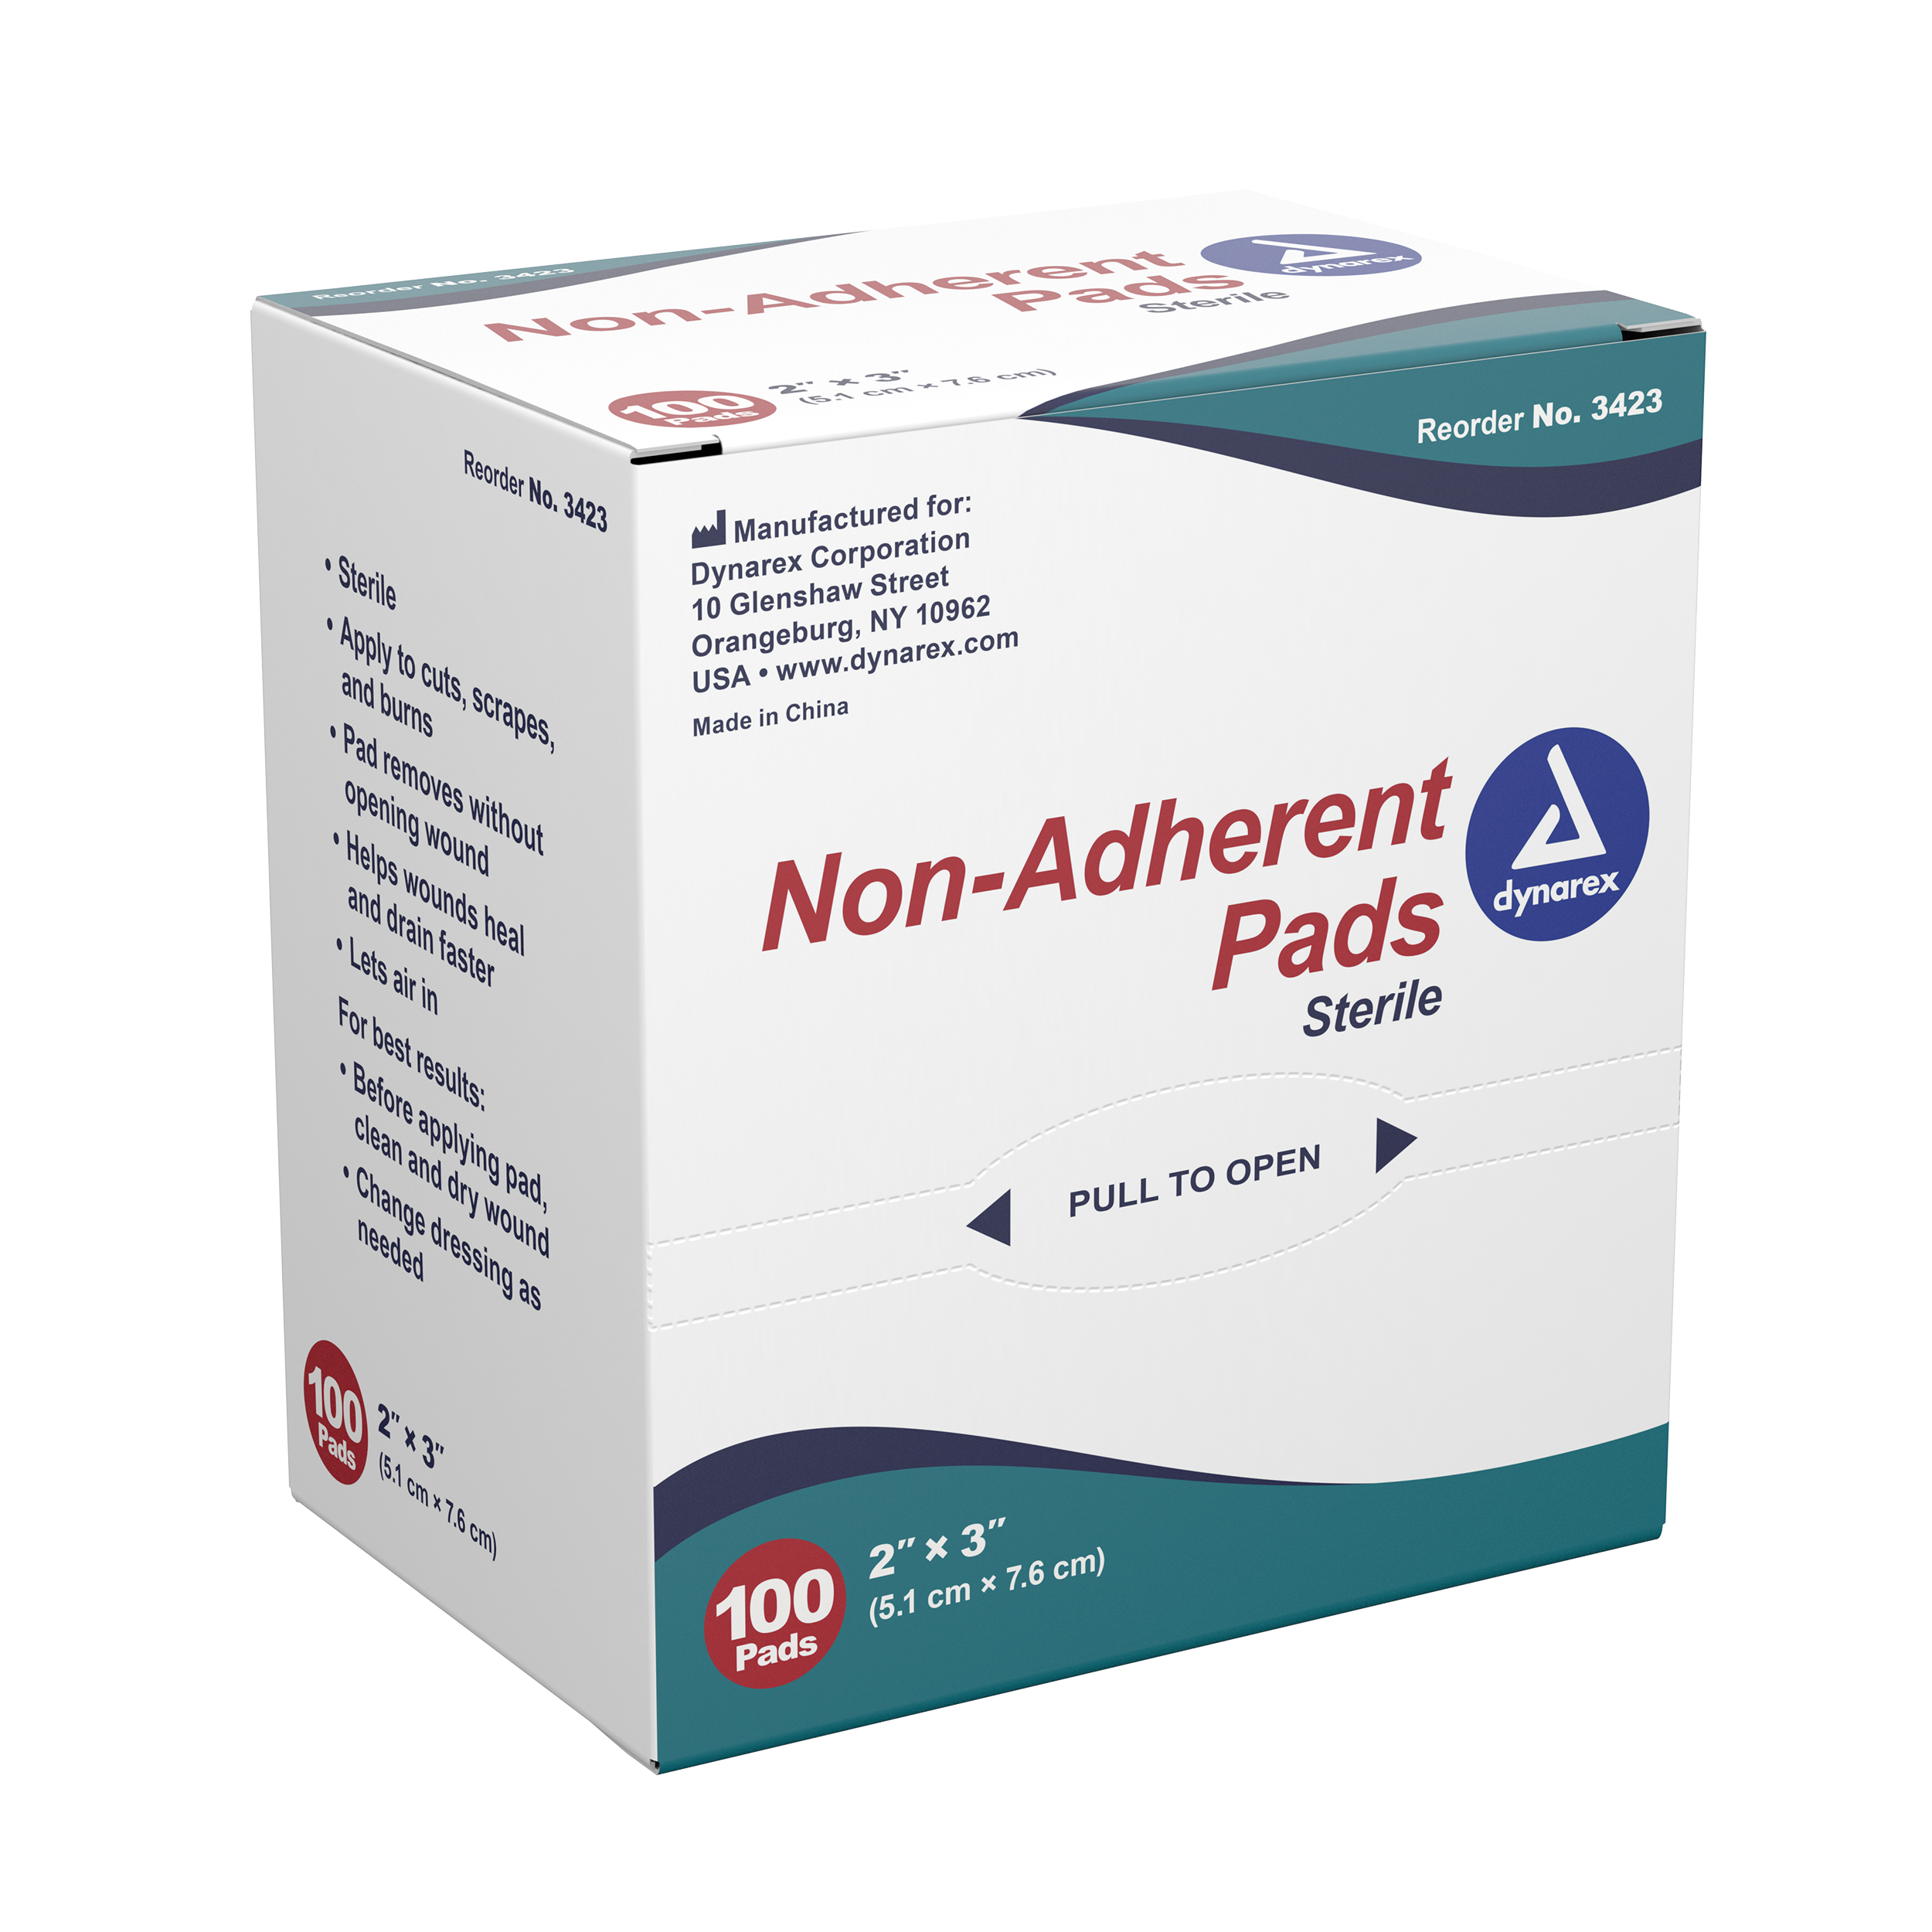 Non-Adherent Pads Sterile, 2